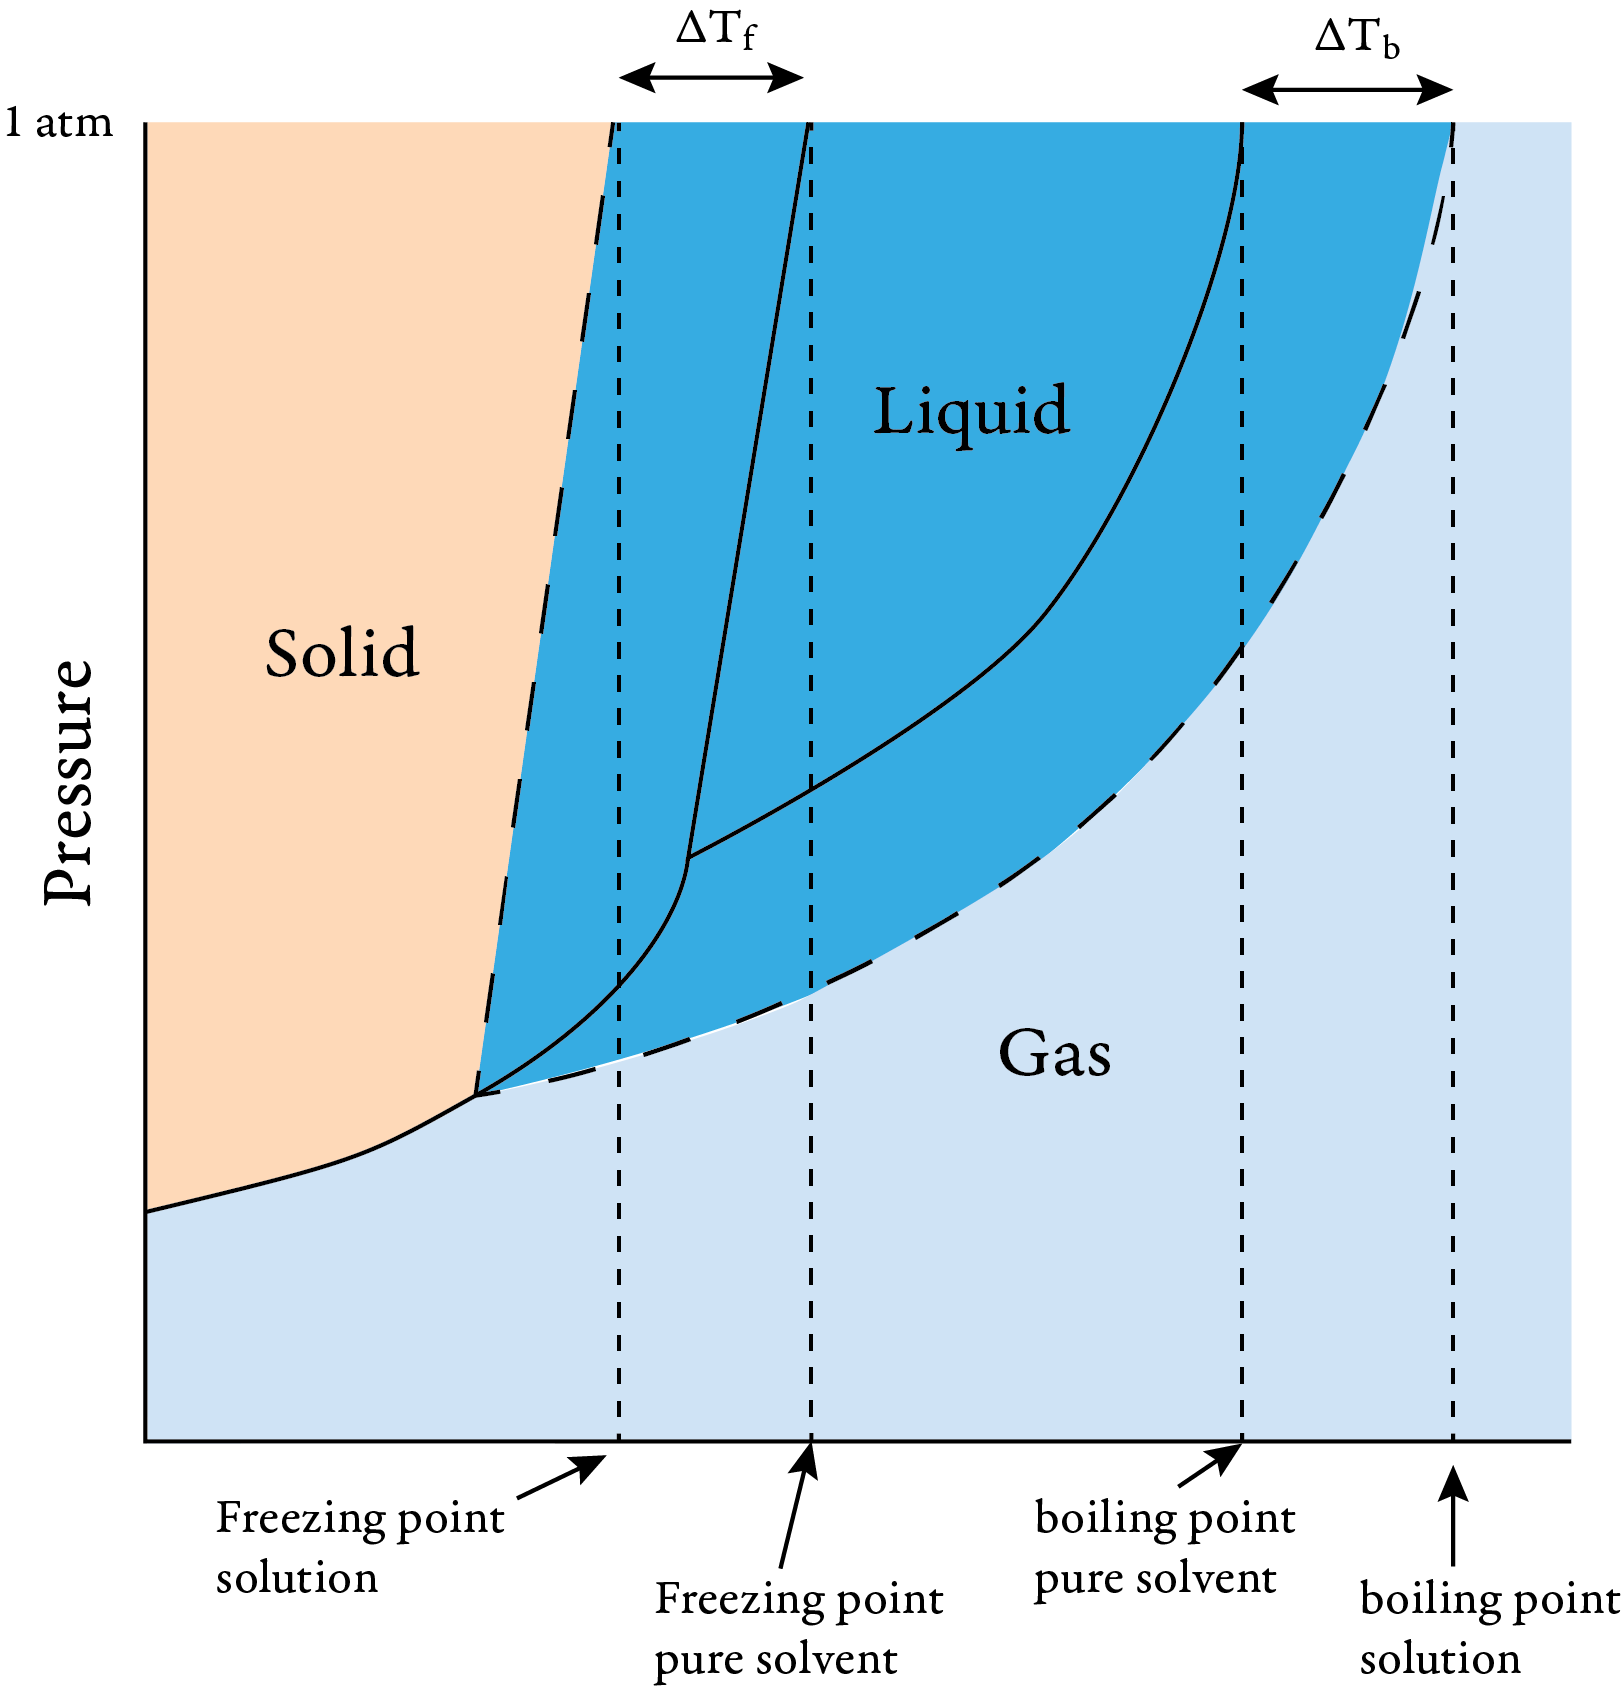 Image of a phase diagram for pure solvent and solutions. It shows boiling point elevation and freezing point depression